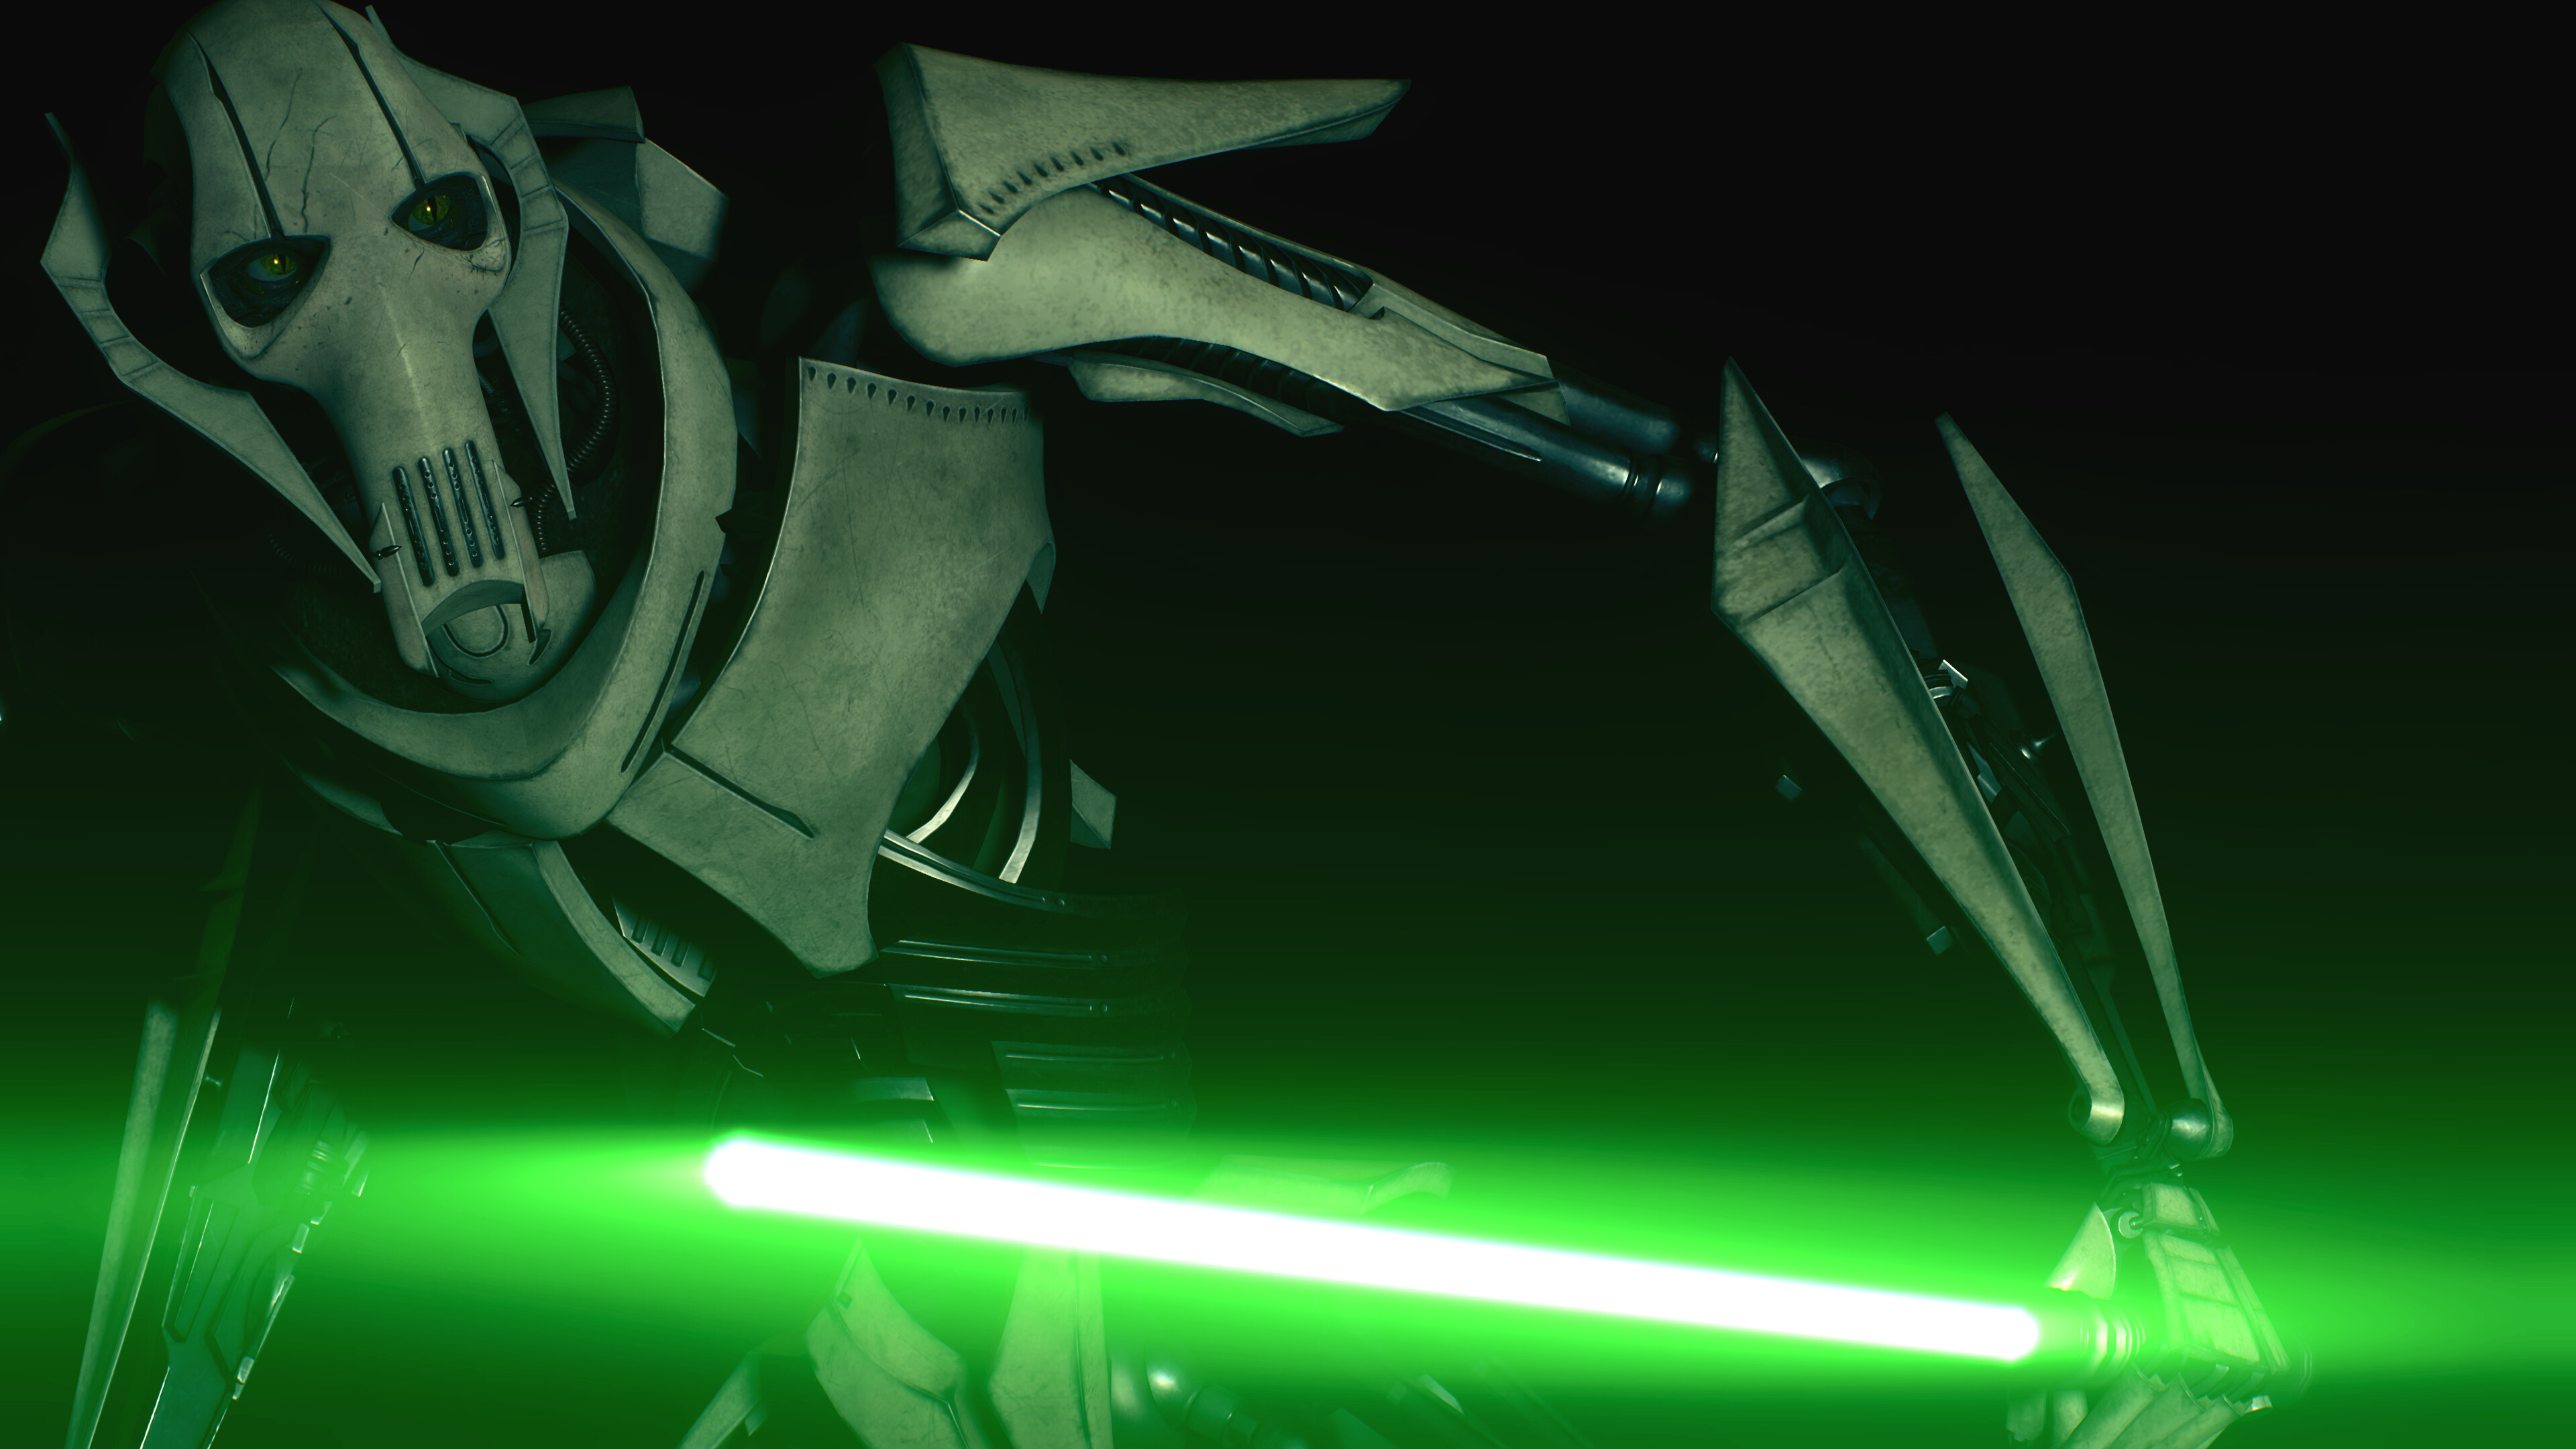 General Grievous: Star Wars: Battlefront II, 2017, Fiction, An action shooter video game based on the Star Wars franchise. 3840x2160 4K Background.